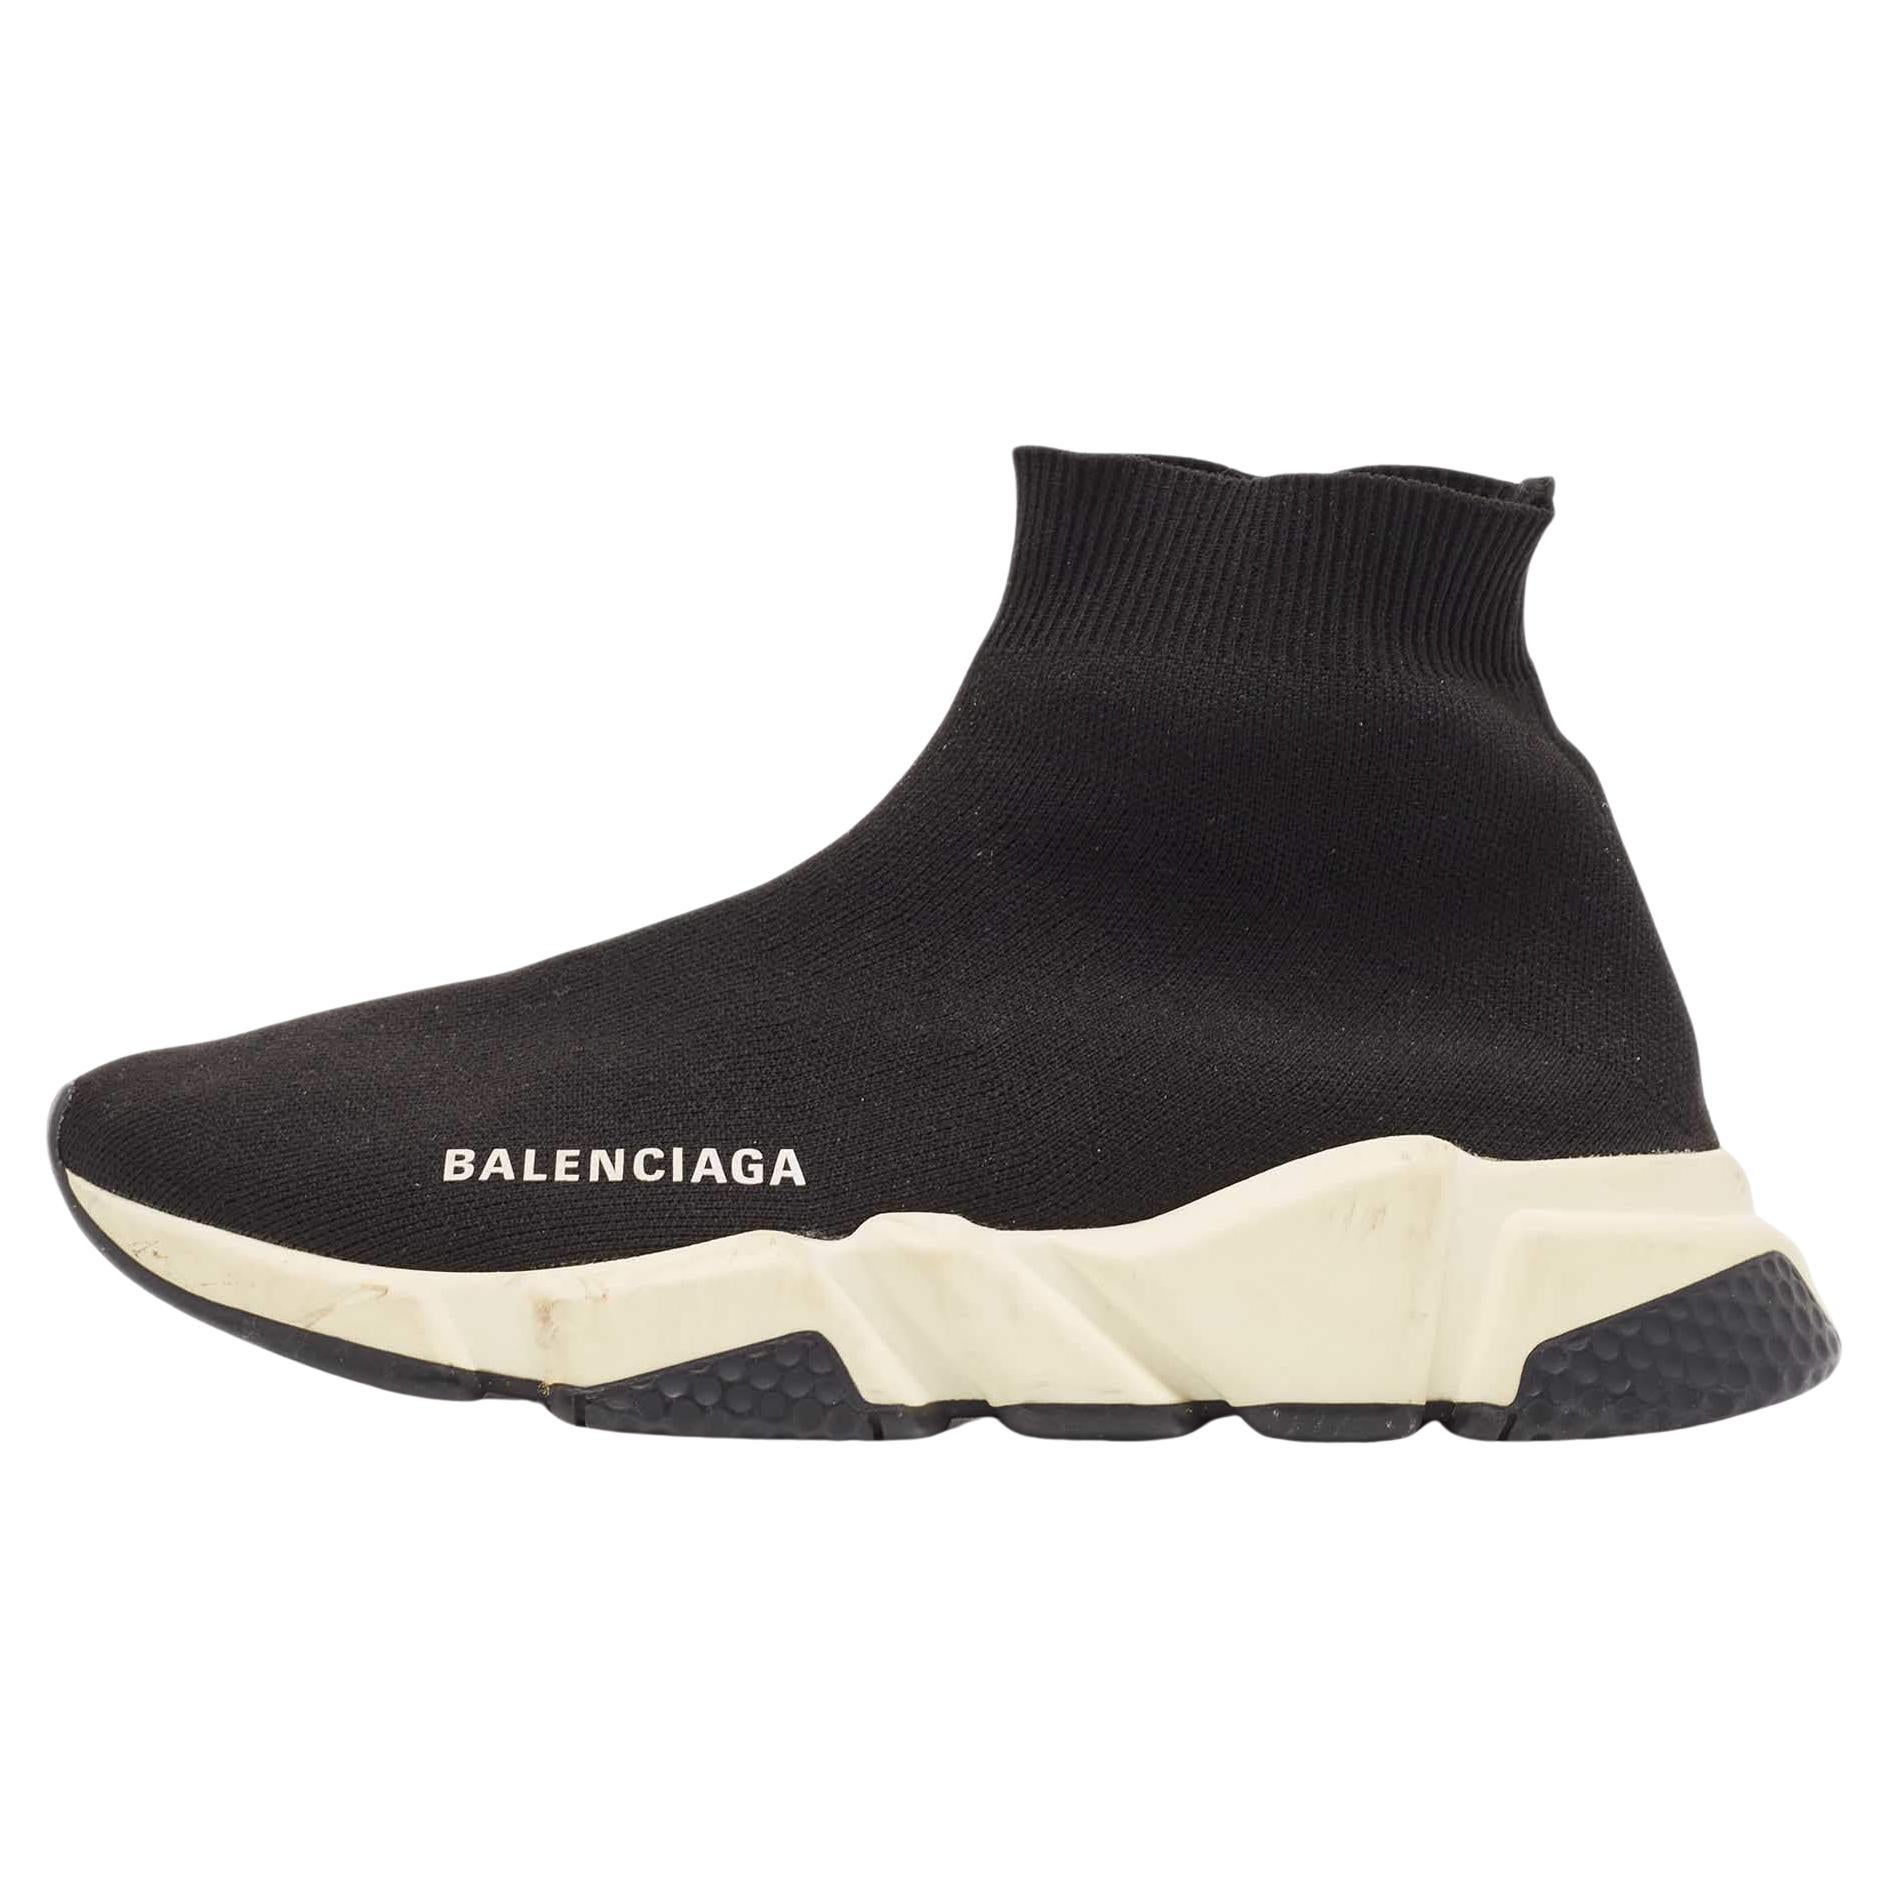 Balenciaga Black Knit Fabric Speed Trainer Sneakers Size 37 For Sale